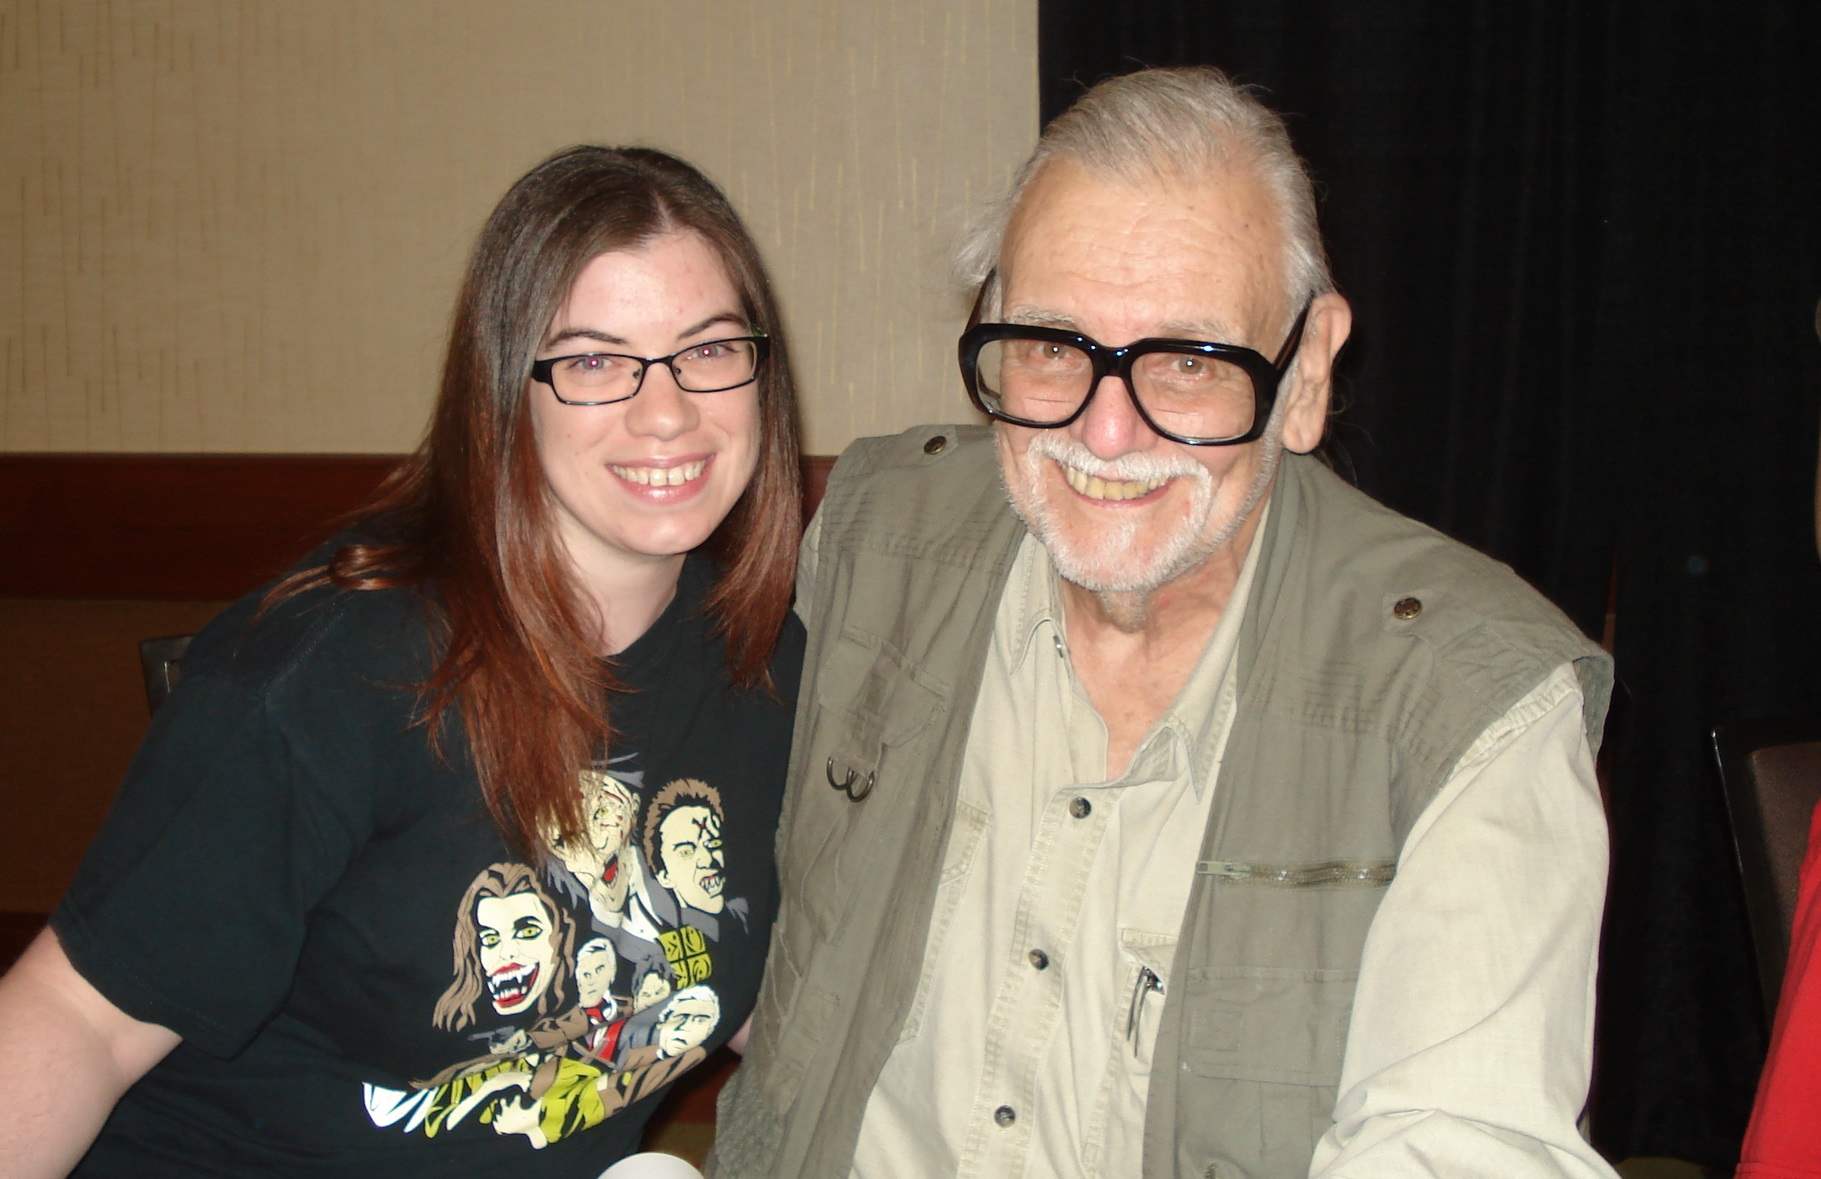 Fan picture with George Romero